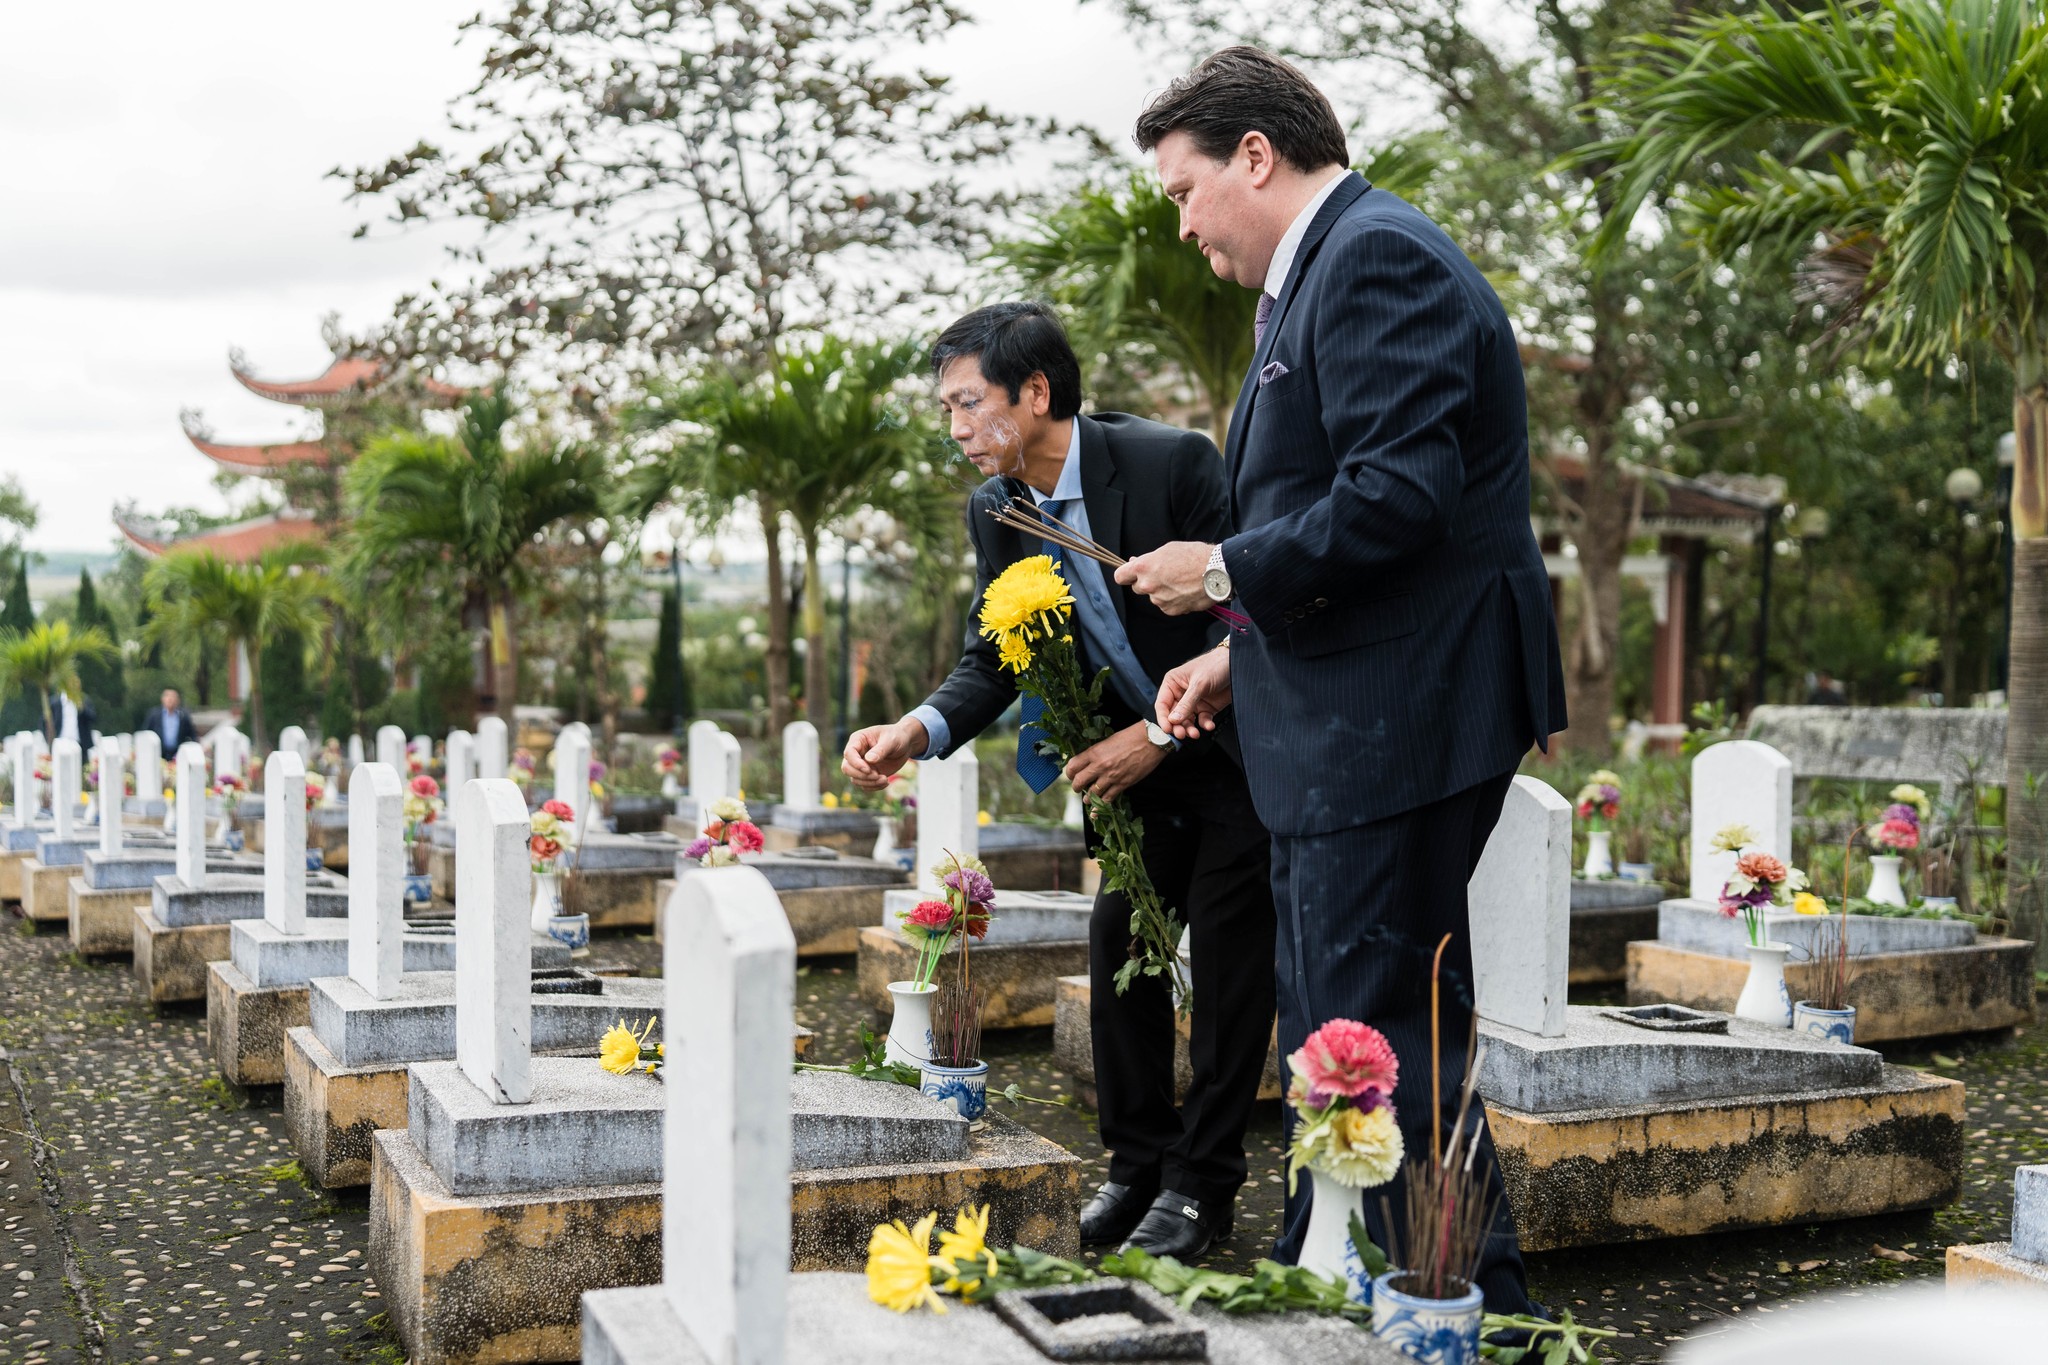 U.S. Ambassador to Vietnam Marc Knapper (R) offers incense at the Road 9 National Martyrs' Cemetery in Quang Tri Province, Vietnam, January 11, 2022. Photo: Hong Van / Tuoi Tre